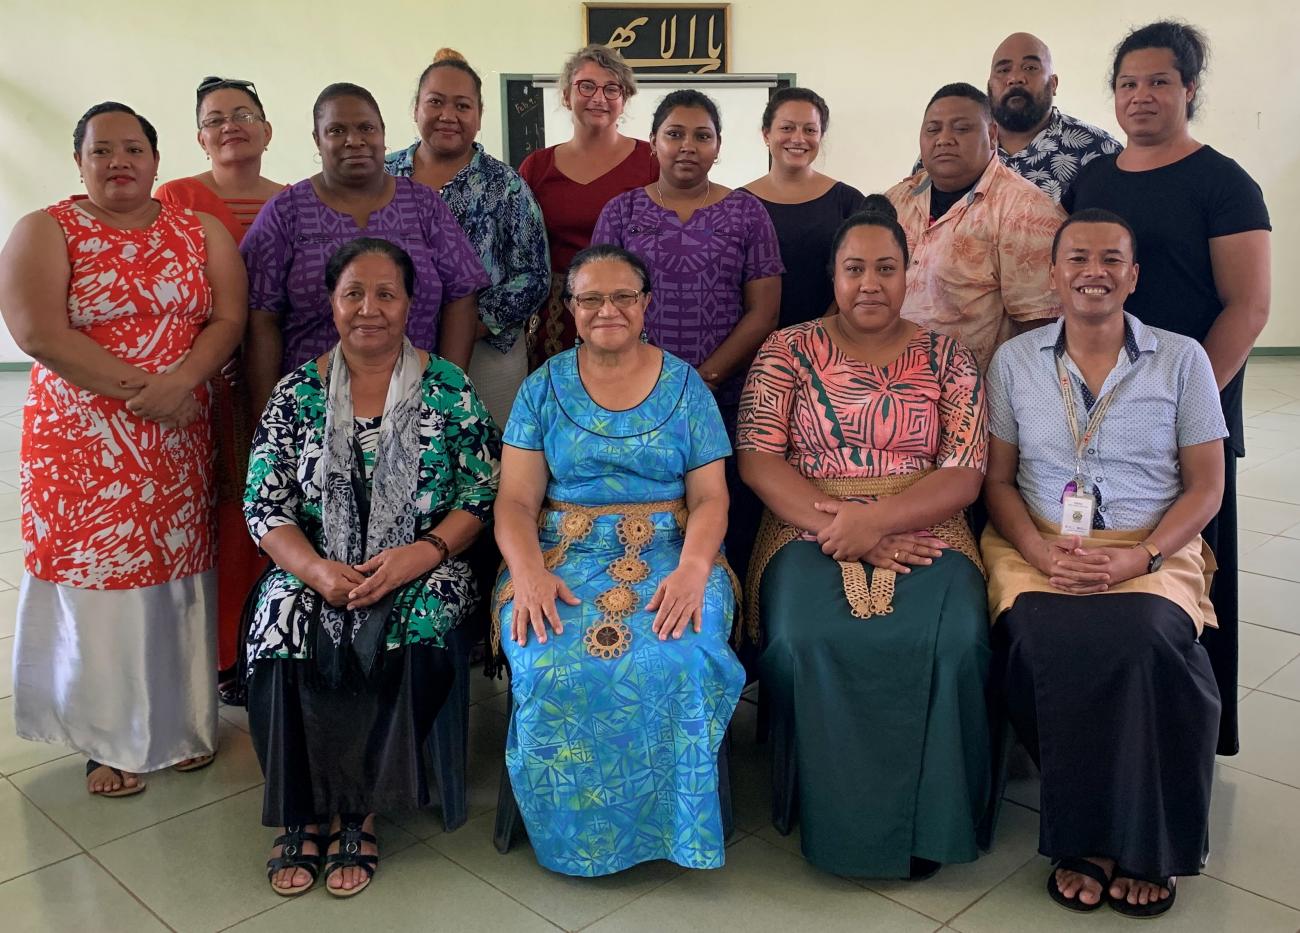 Tonga finding new ways to promote human rights for vulnerable women and children